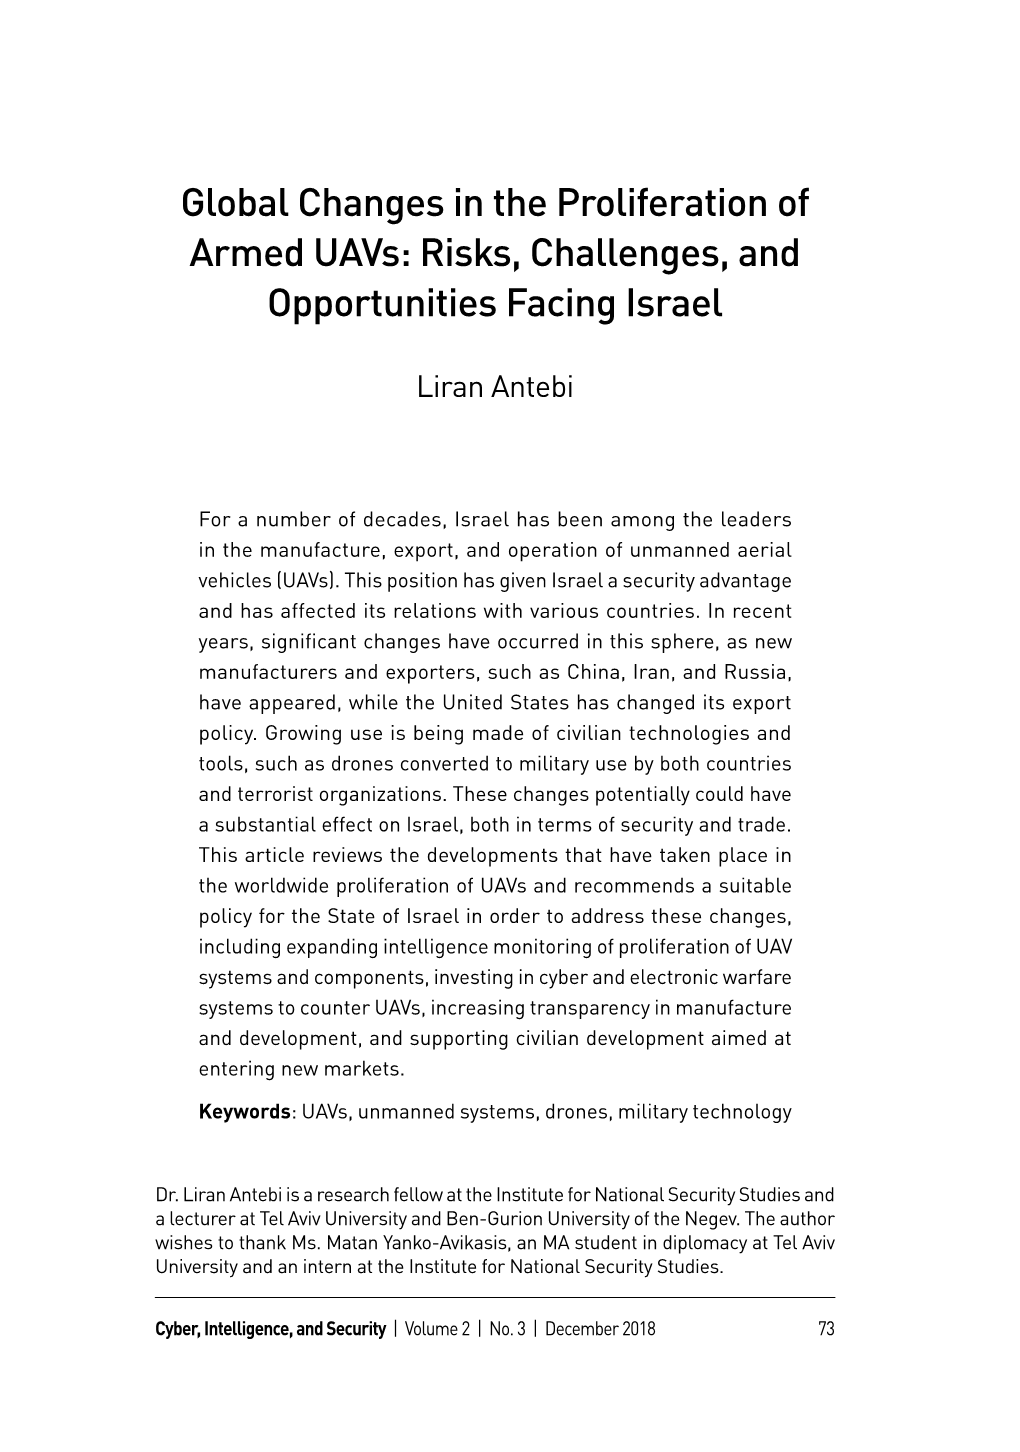 Global Changes in the Proliferation of Armed Uavs: Risks, Challenges, and Opportunities Facing Israel